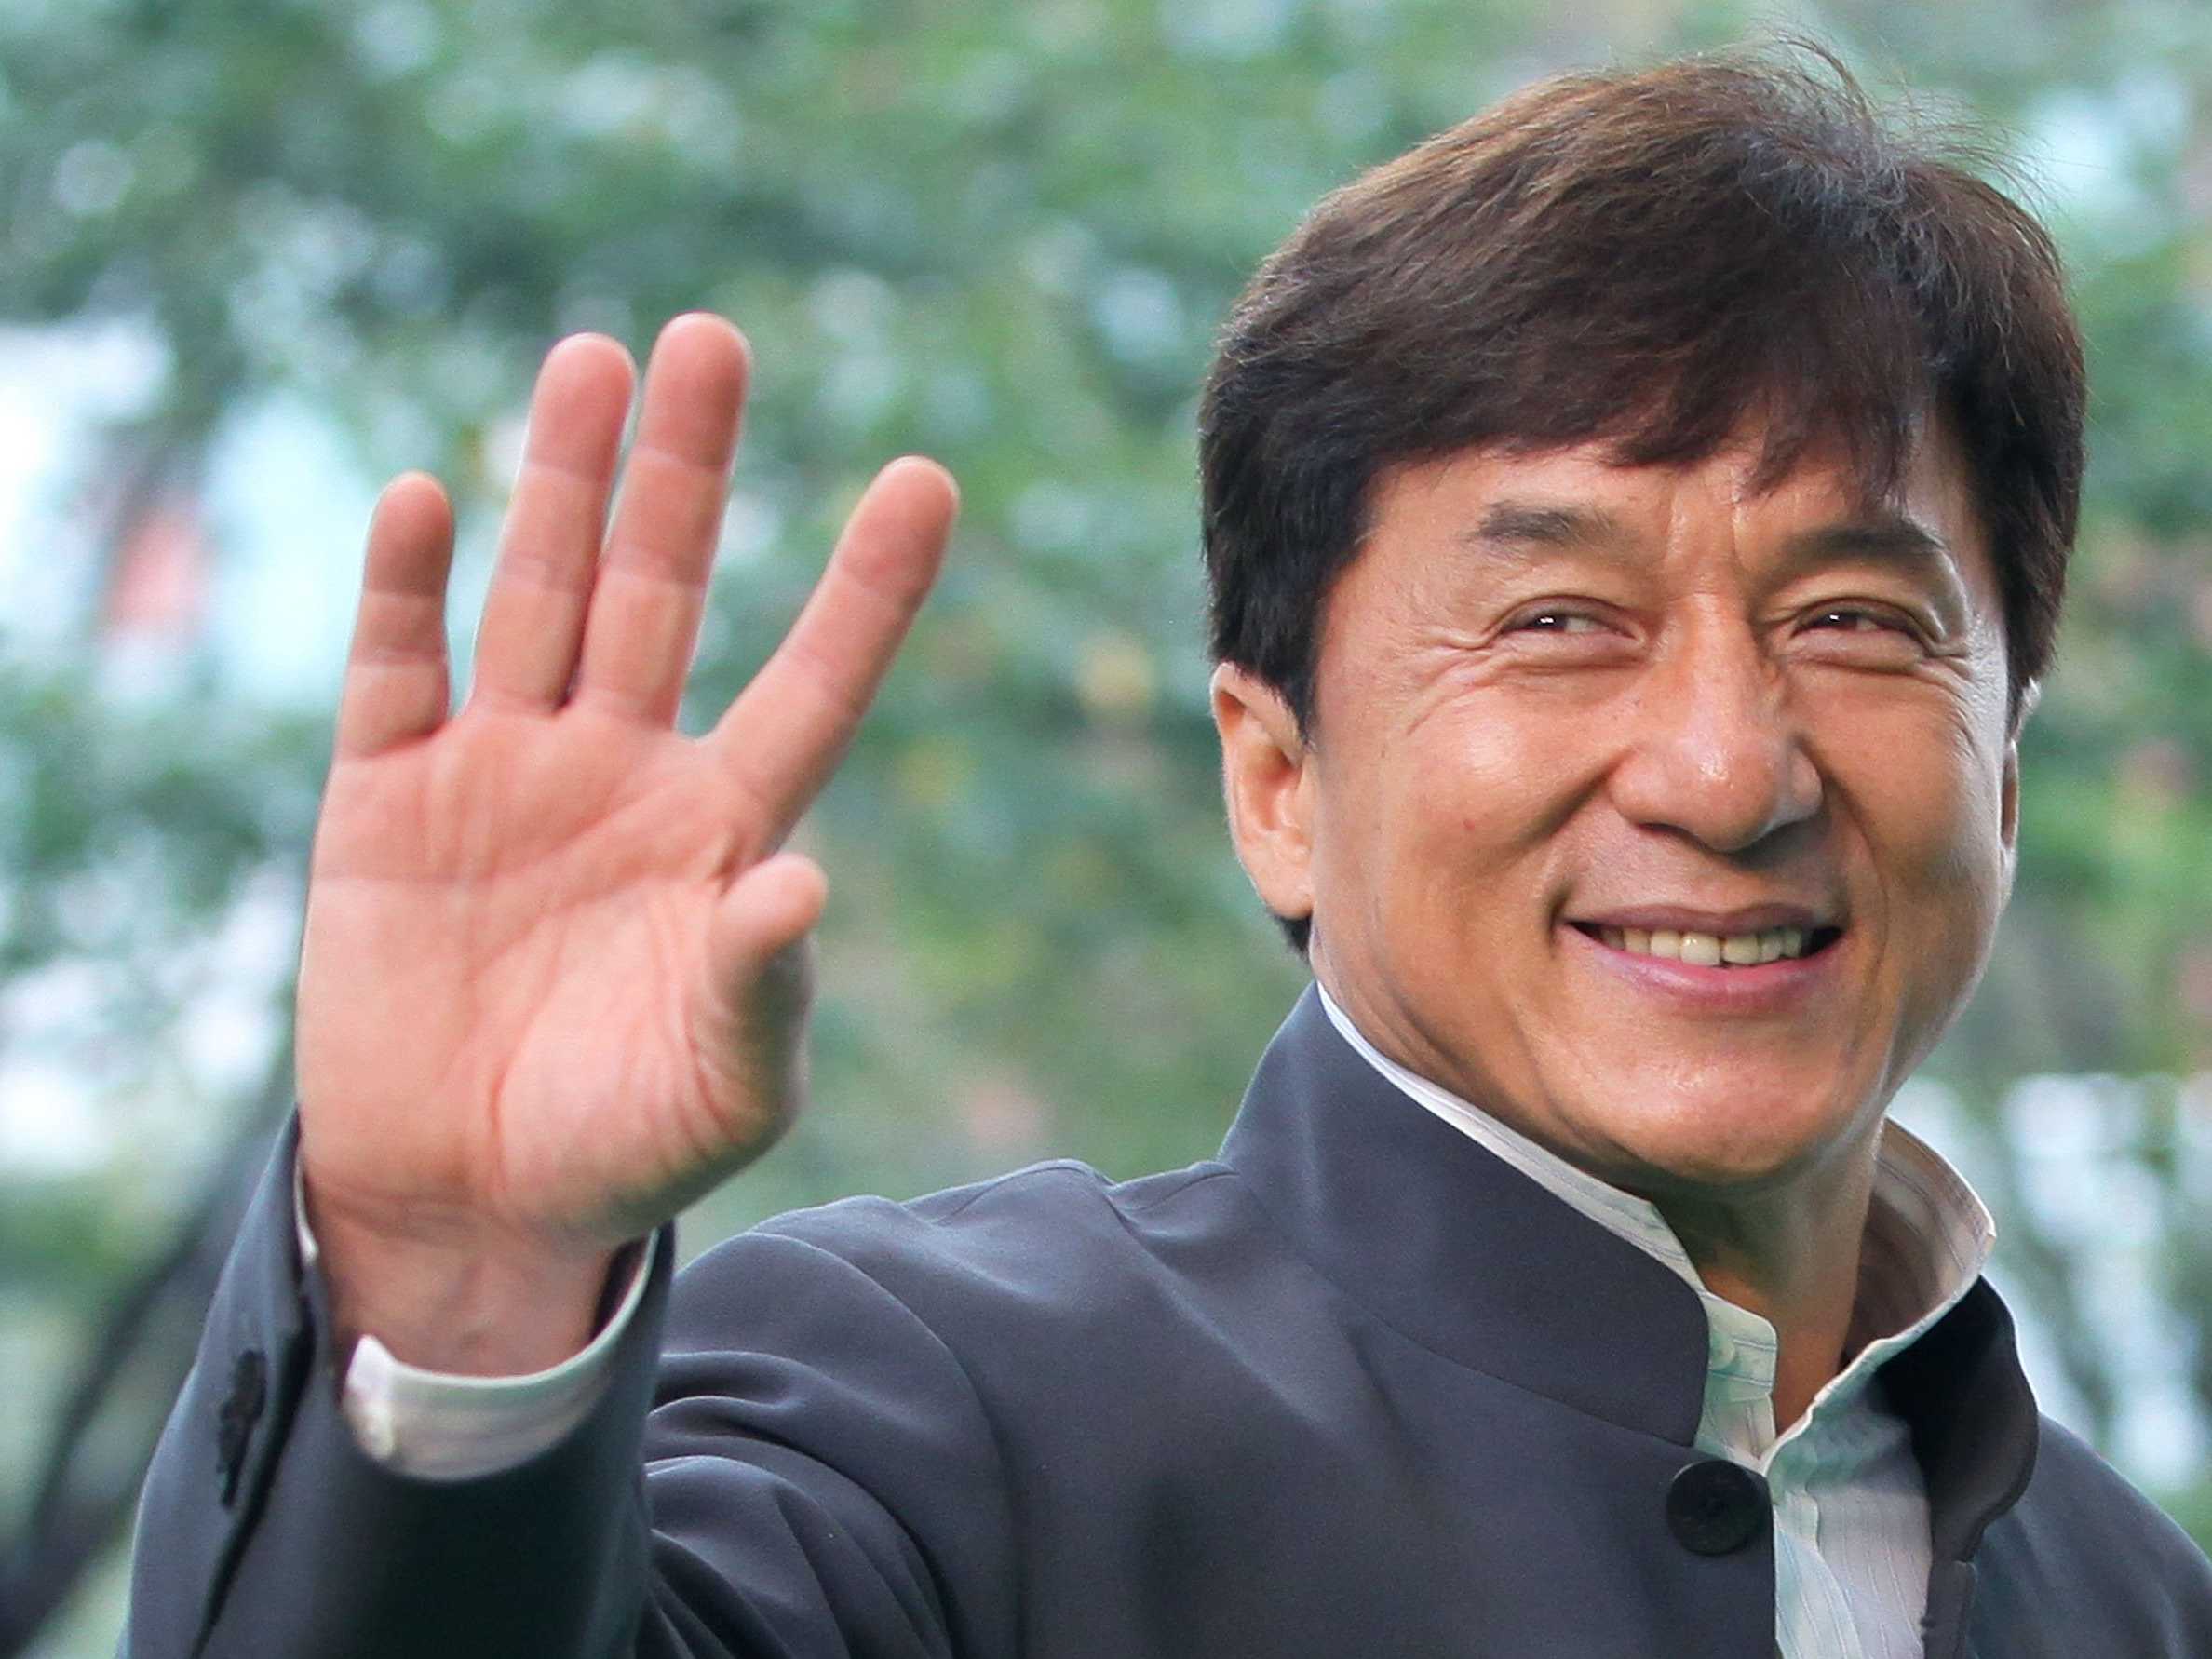 Jackie Chan: International Superstar To Meet Fans In Kuching This